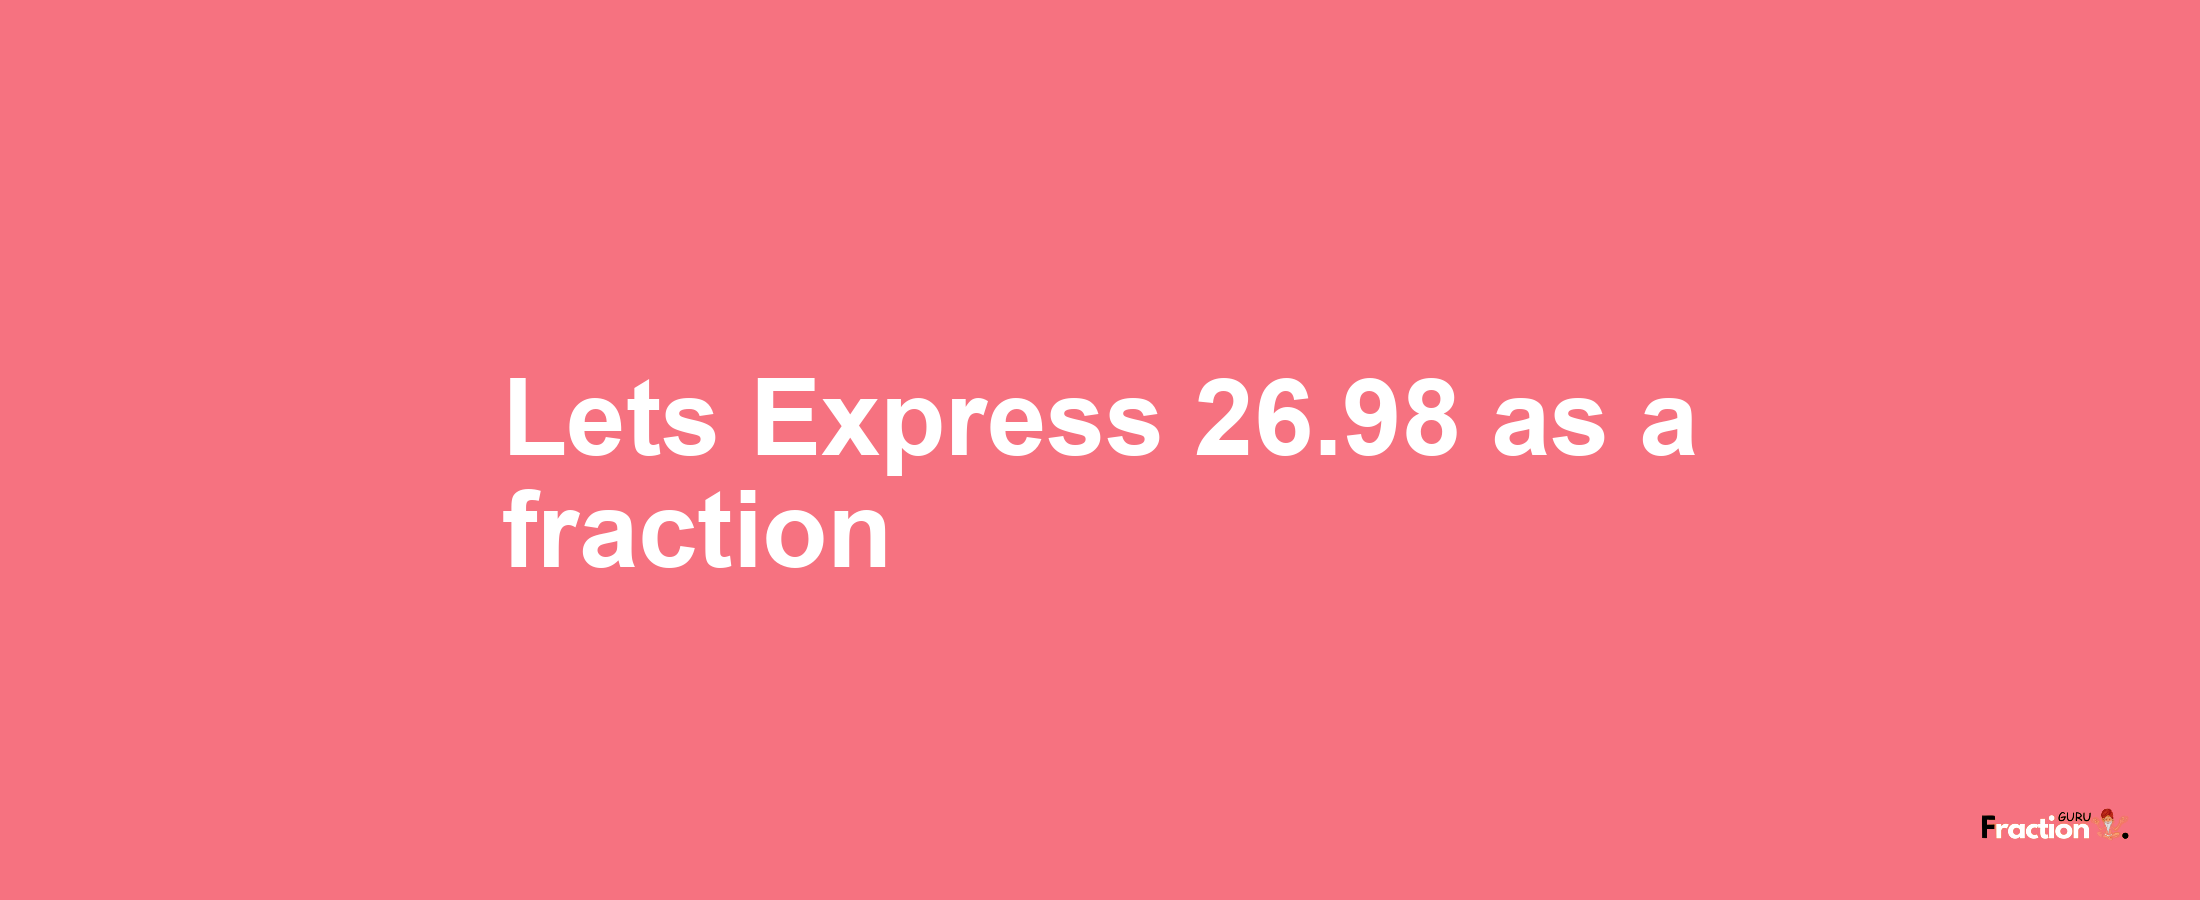 Lets Express 26.98 as afraction